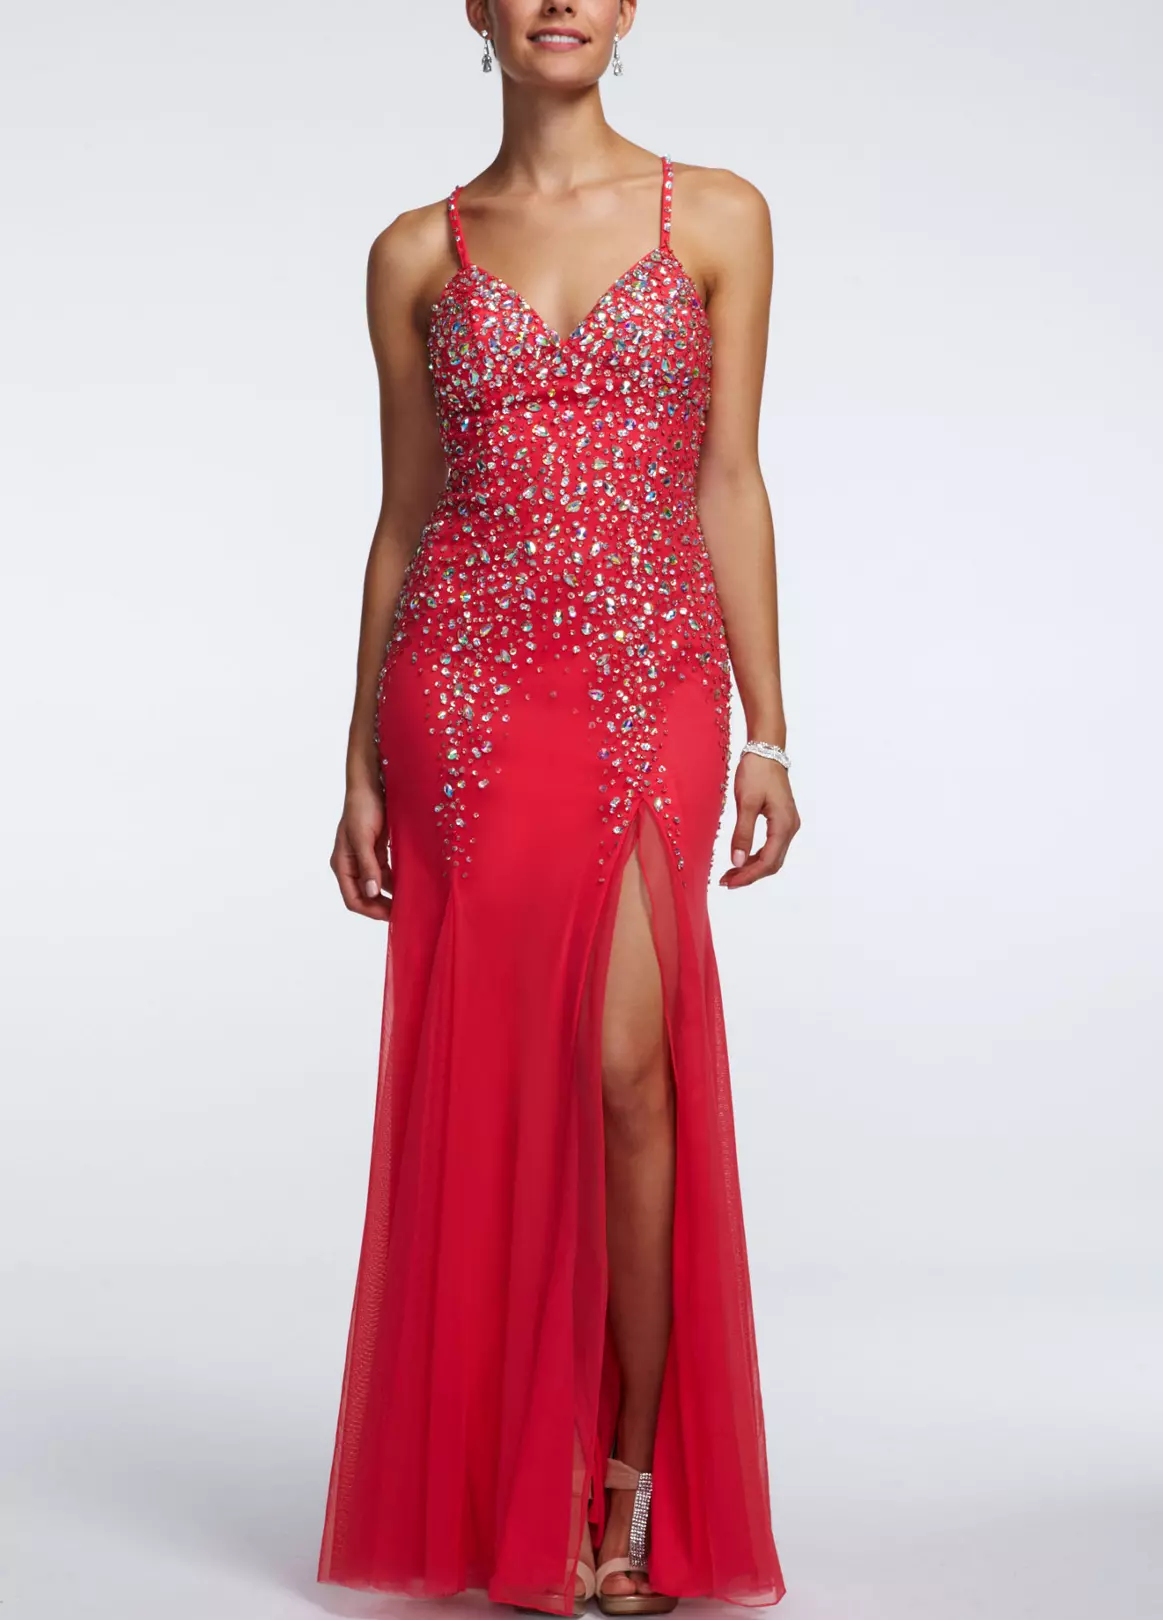 Spaghetti Strap All Over Beaded Prom Dress Image